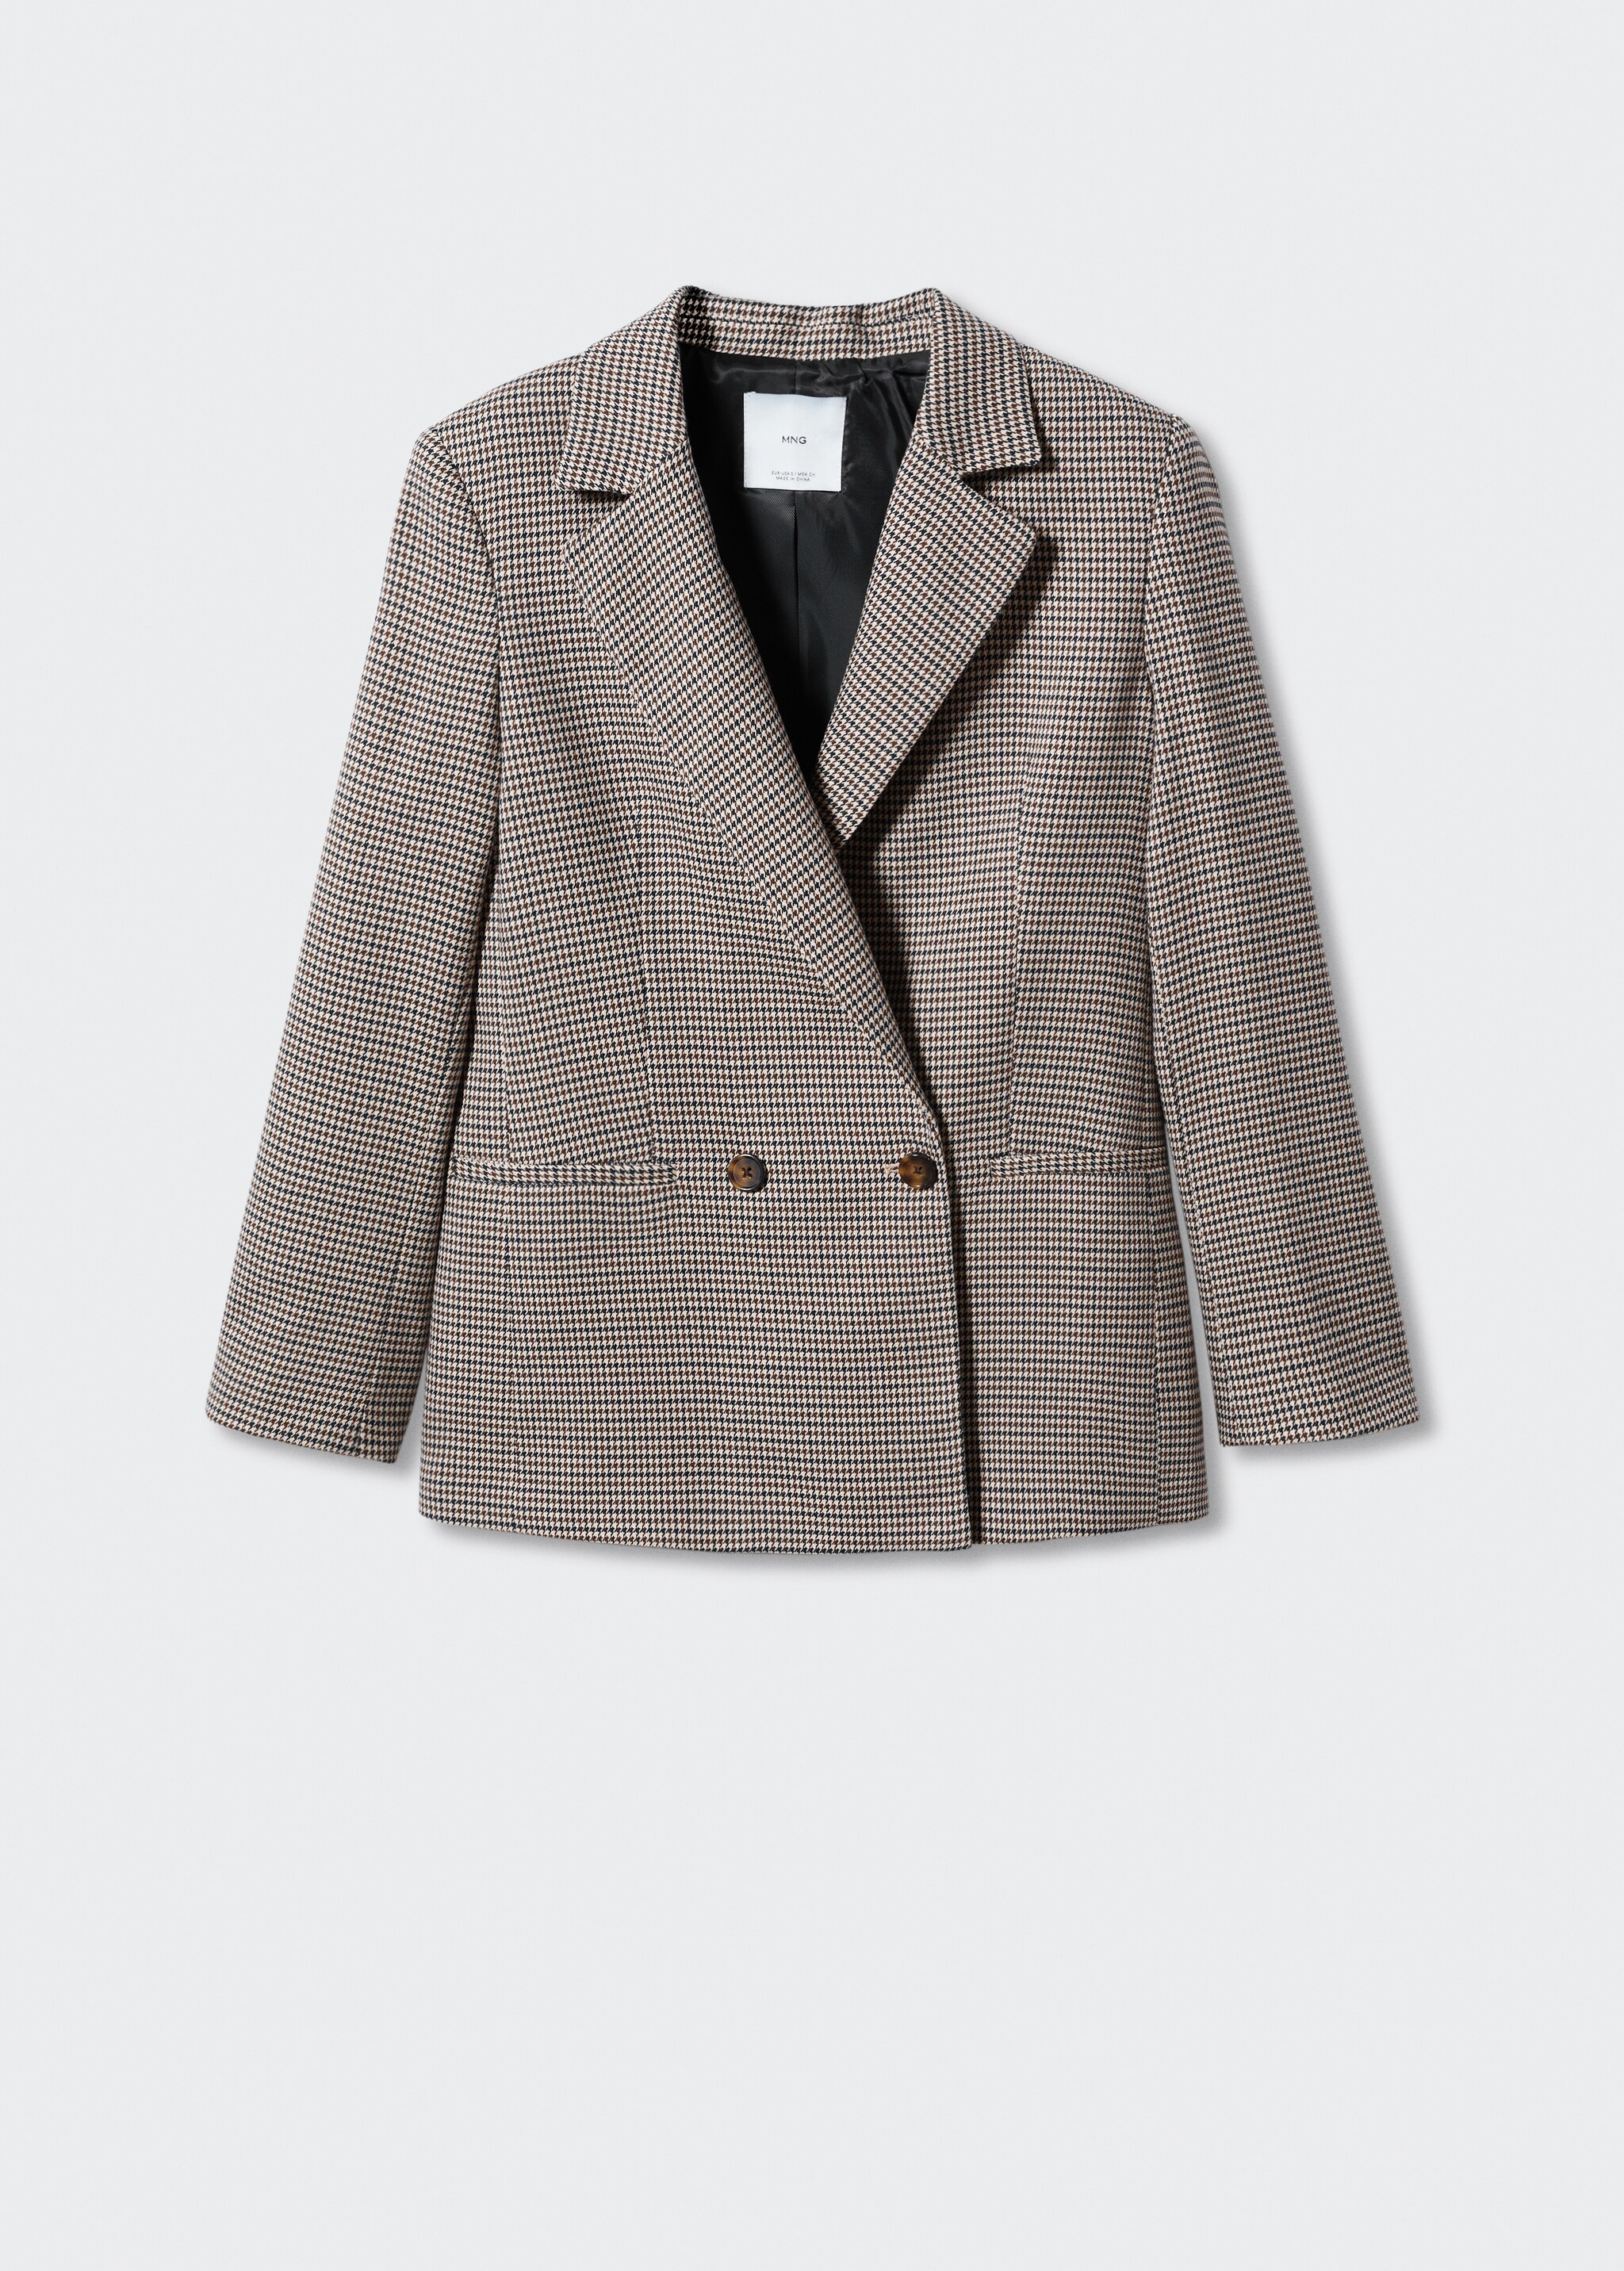 Wrap check suit jacket - Article without model